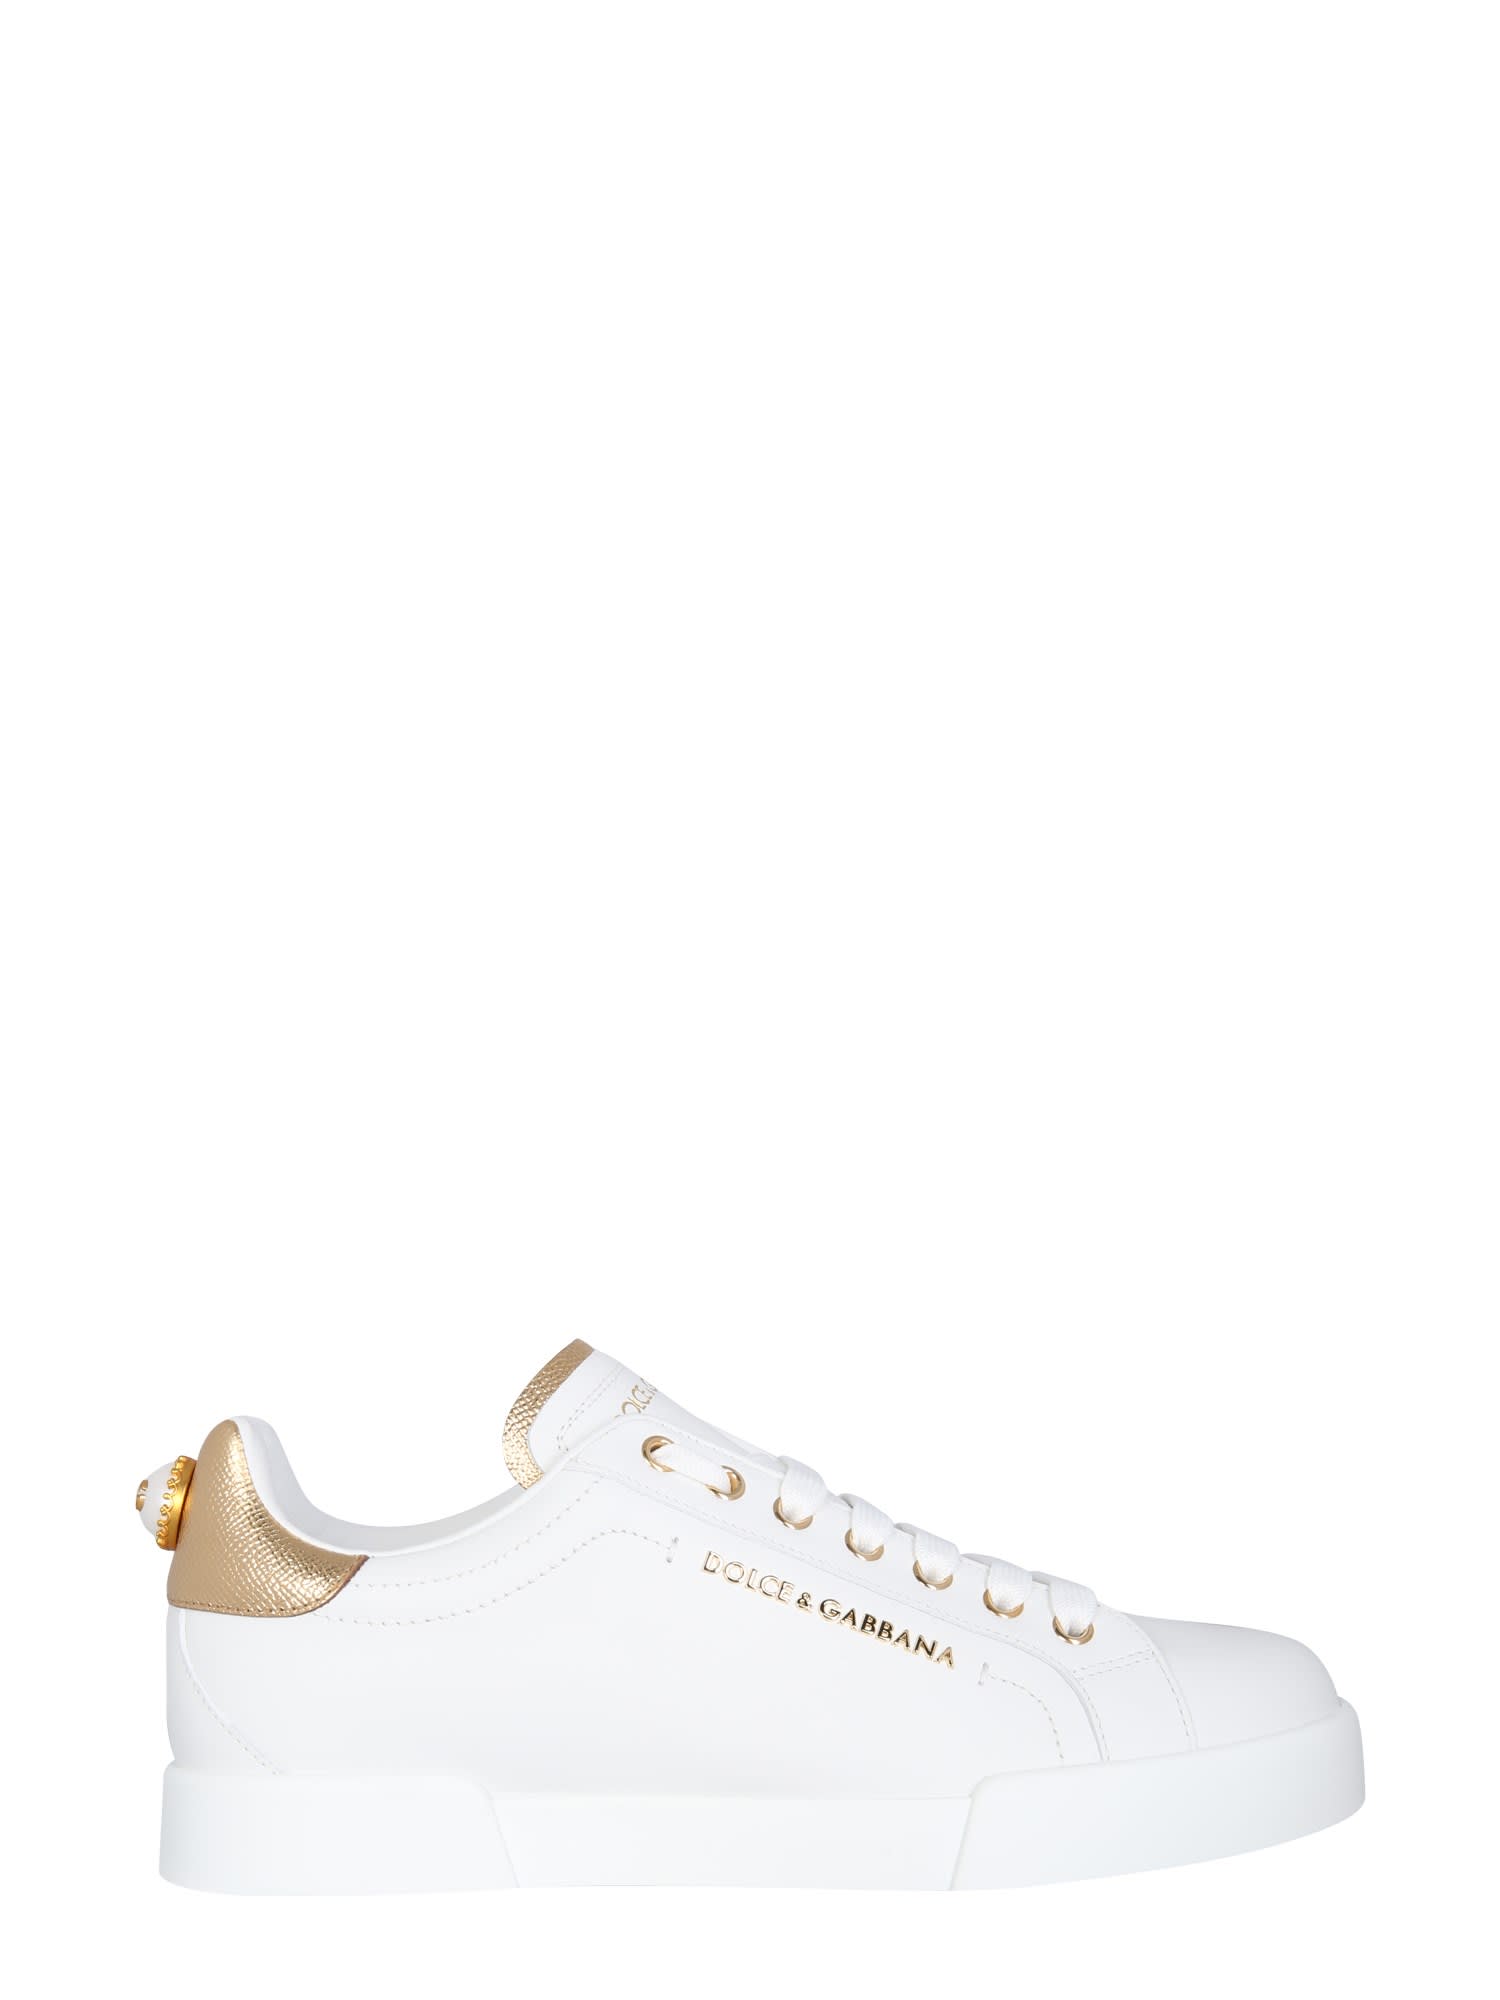 Dolce And Gabbana White And Gold Pearl Sneakers